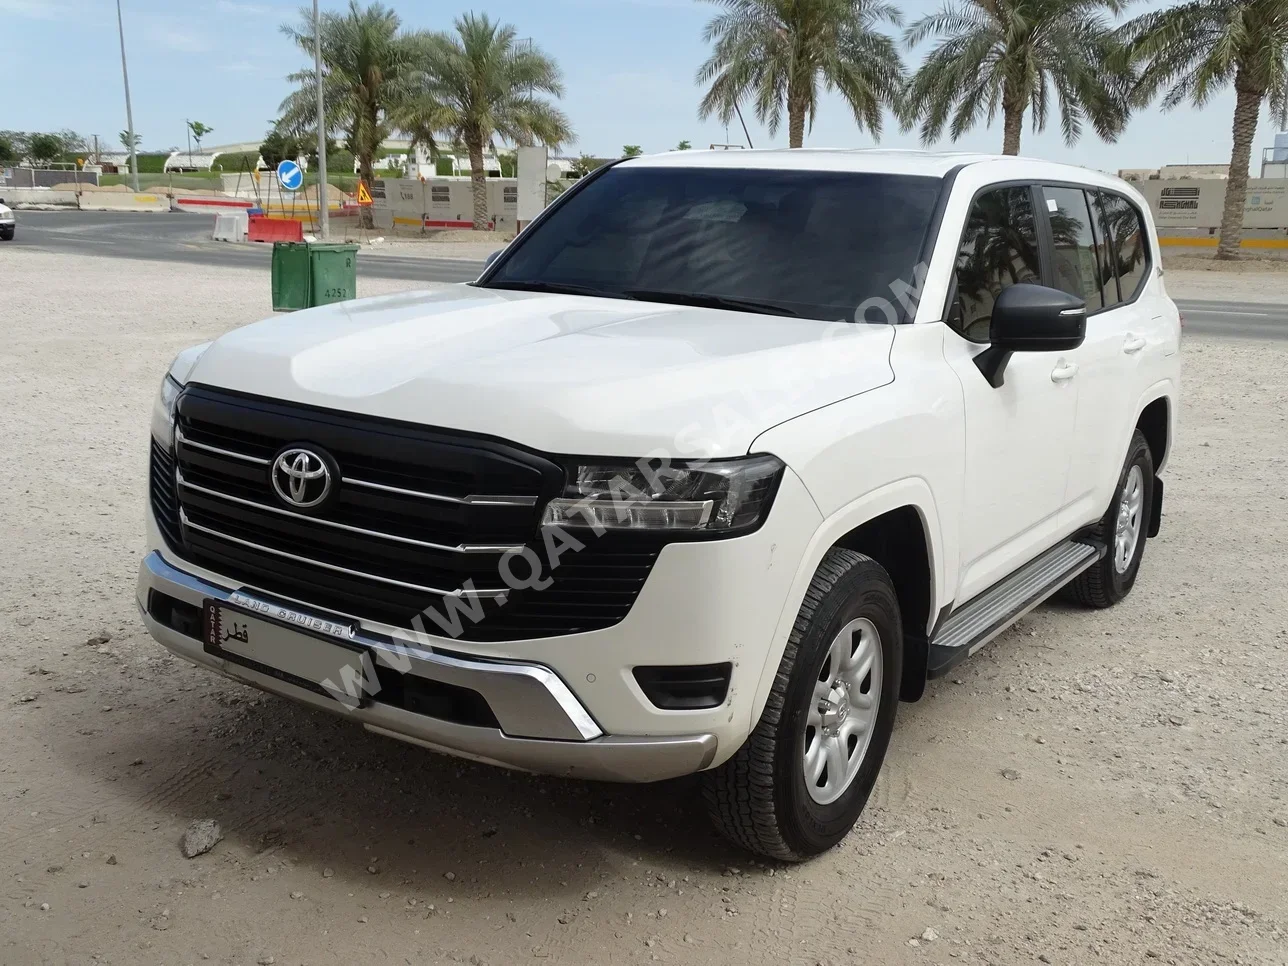 Toyota  Land Cruiser  G  2022  Automatic  87,000 Km  6 Cylinder  Four Wheel Drive (4WD)  SUV  White  With Warranty